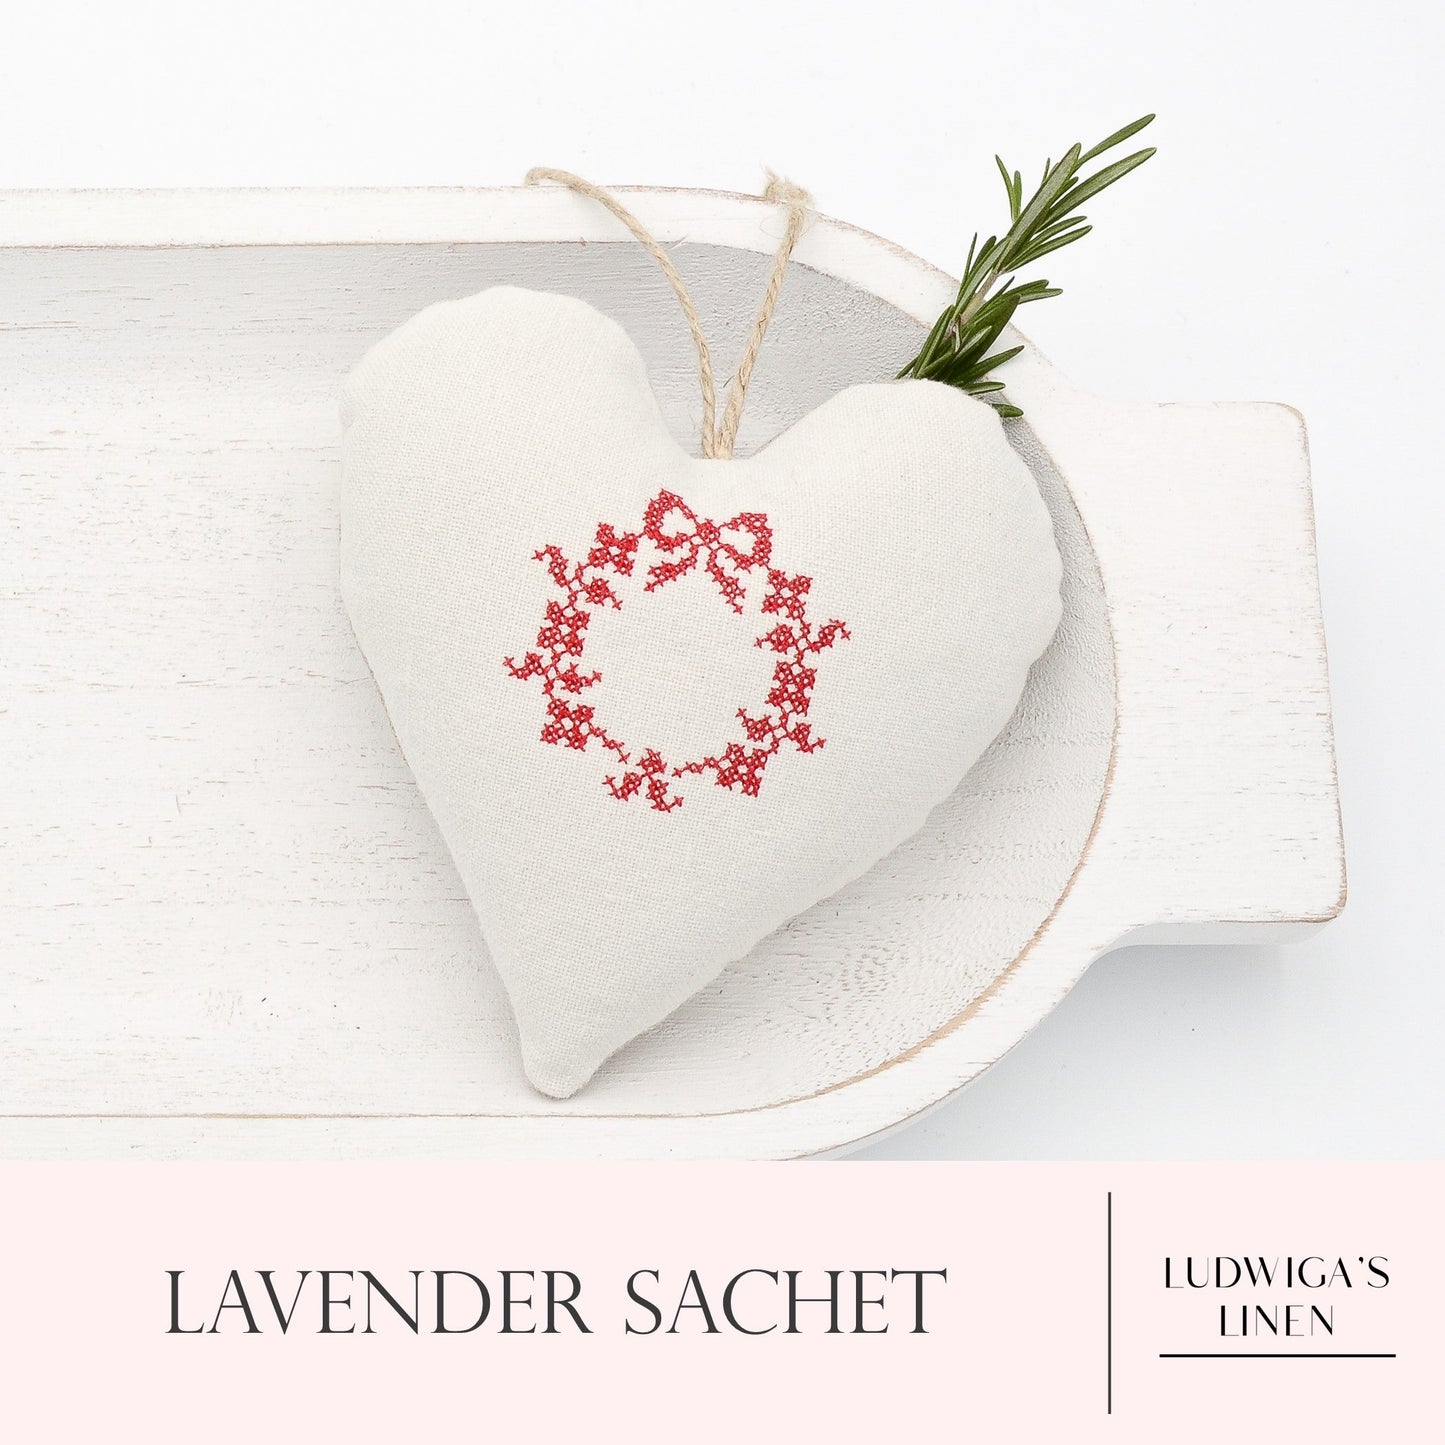 Antique/vintage French/German linen Christmas lavender sachet heart, hemp twine tie and filled with high quality lavender from Provence France